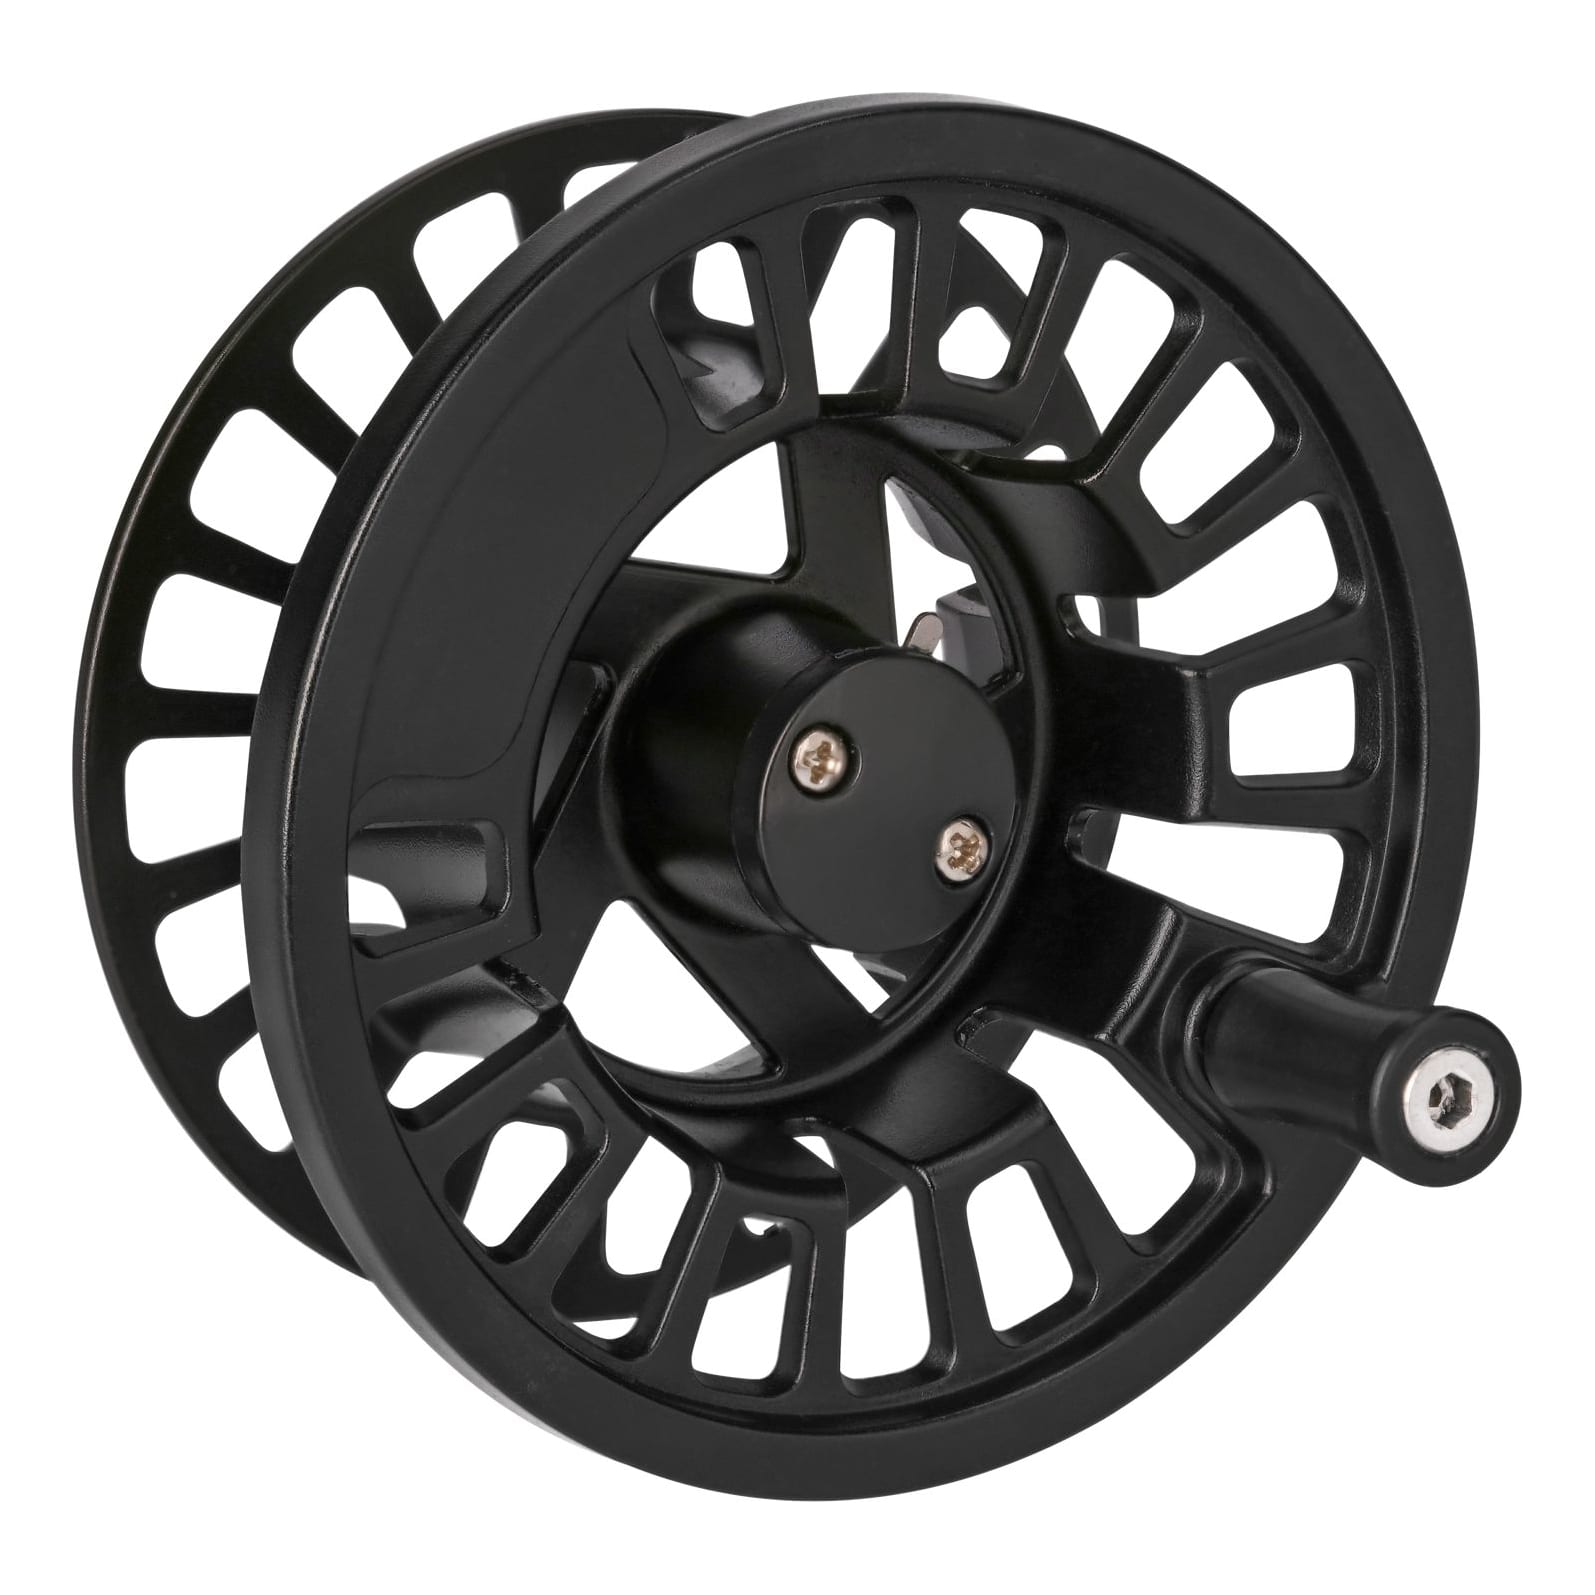 White River Fly Shop® Dogwood Canyon Fly Reel